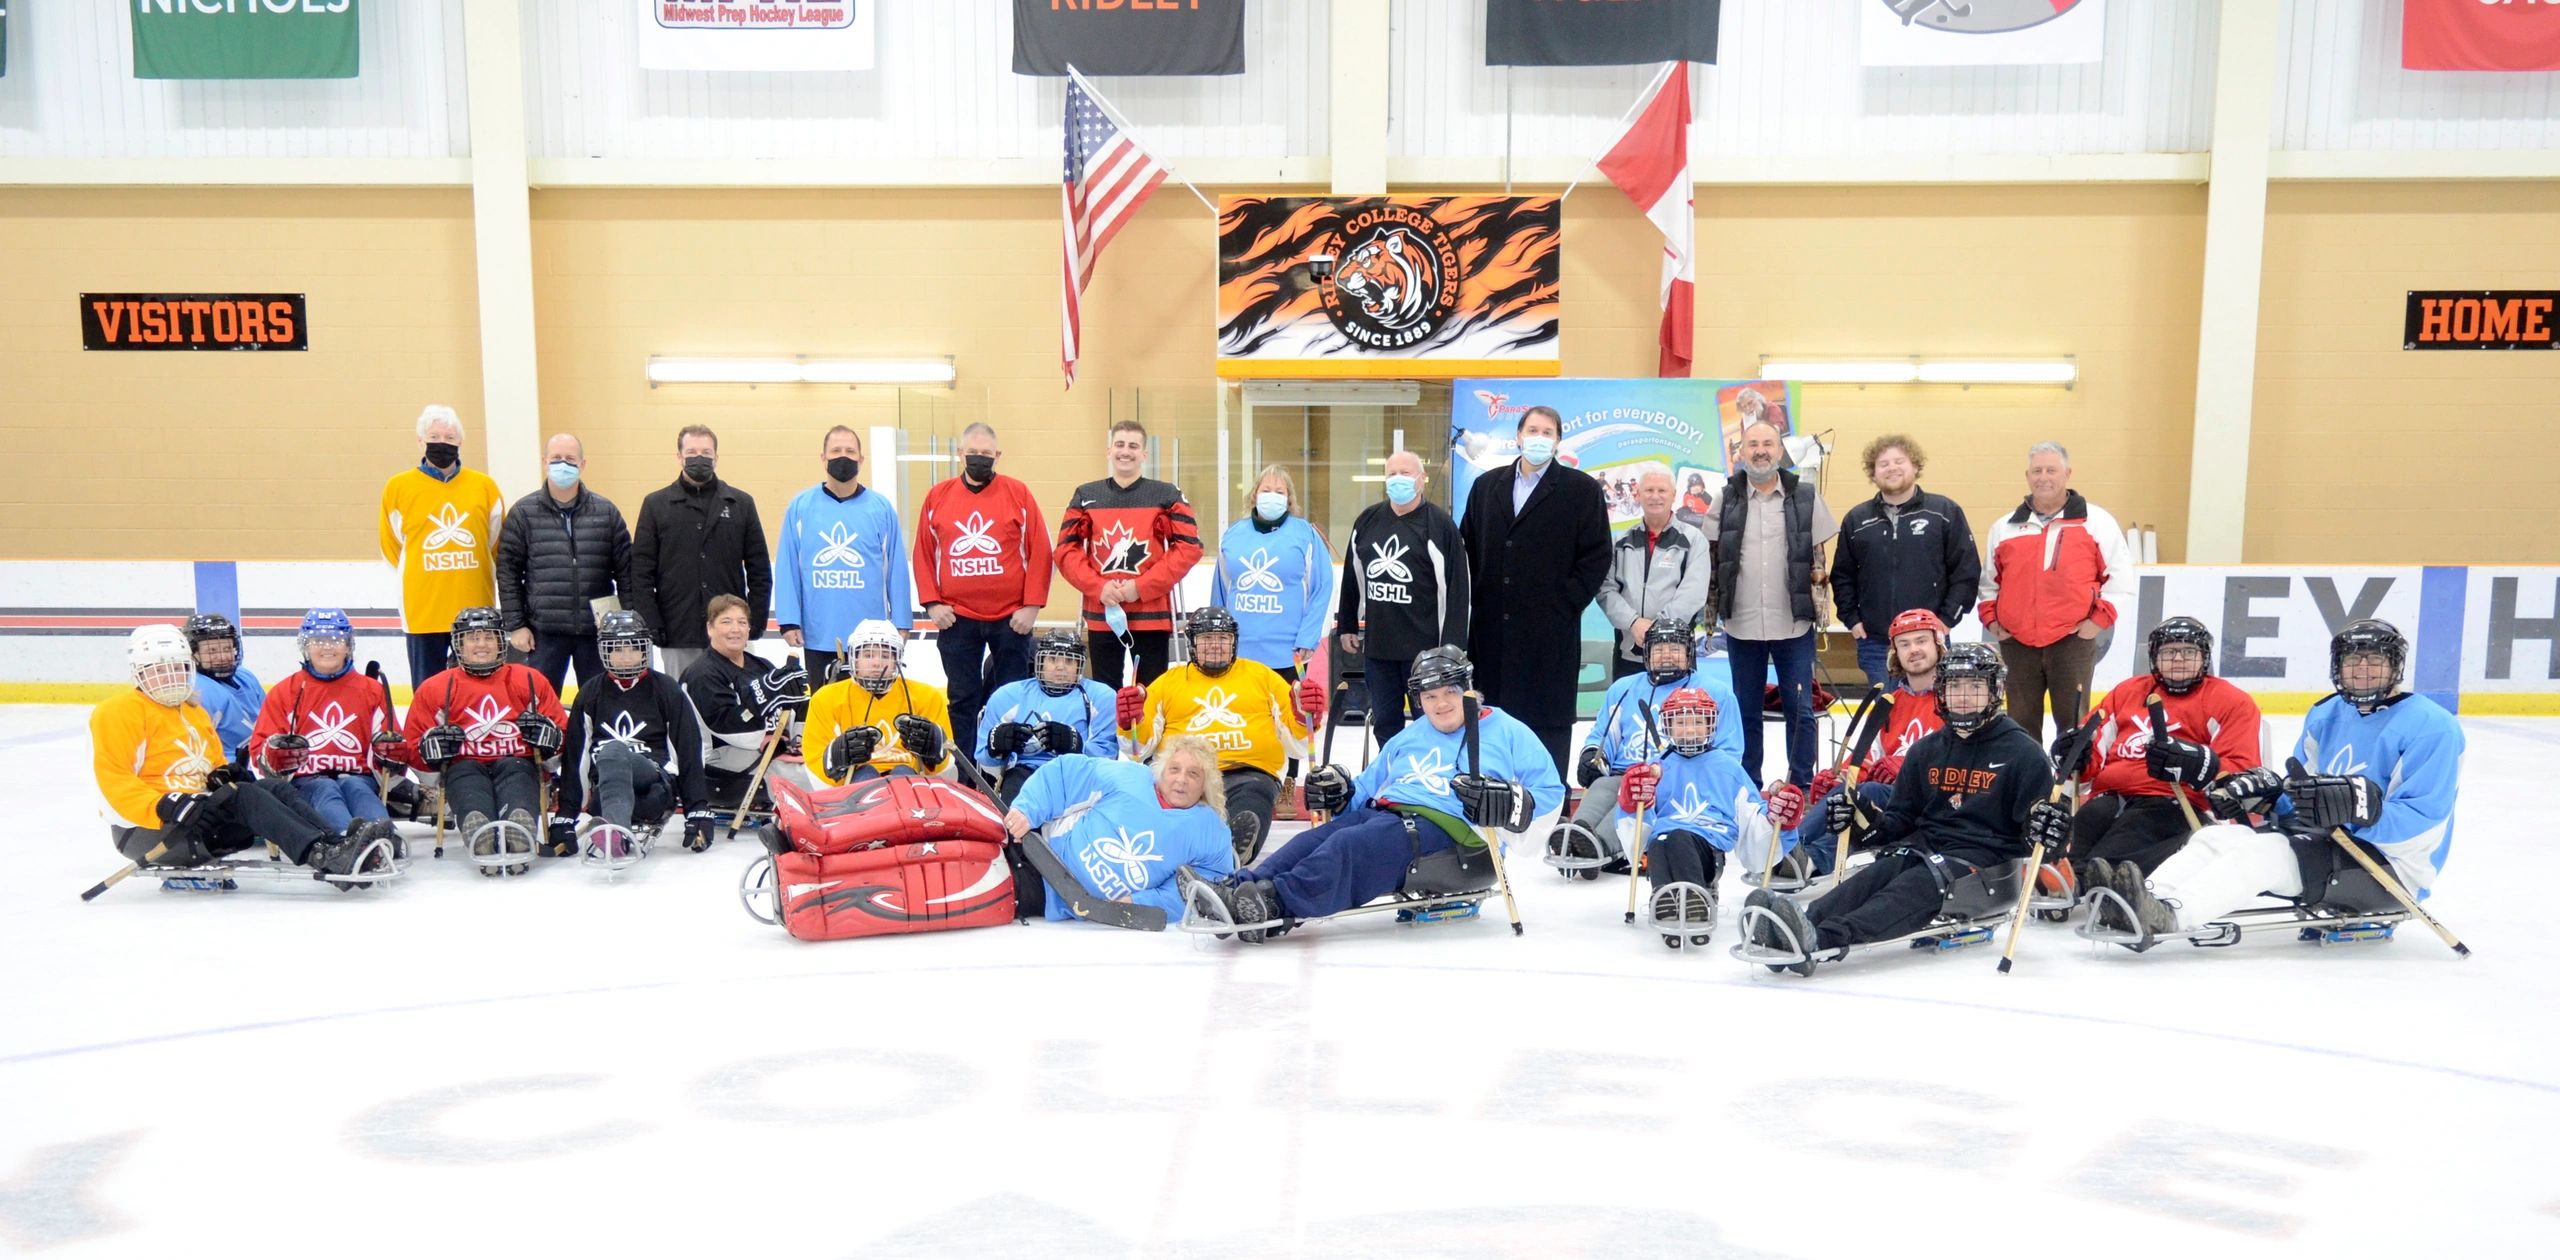 The players of the Niagara Sledge Hockey League posing with the Mayors from Niagara at the Puck Drop